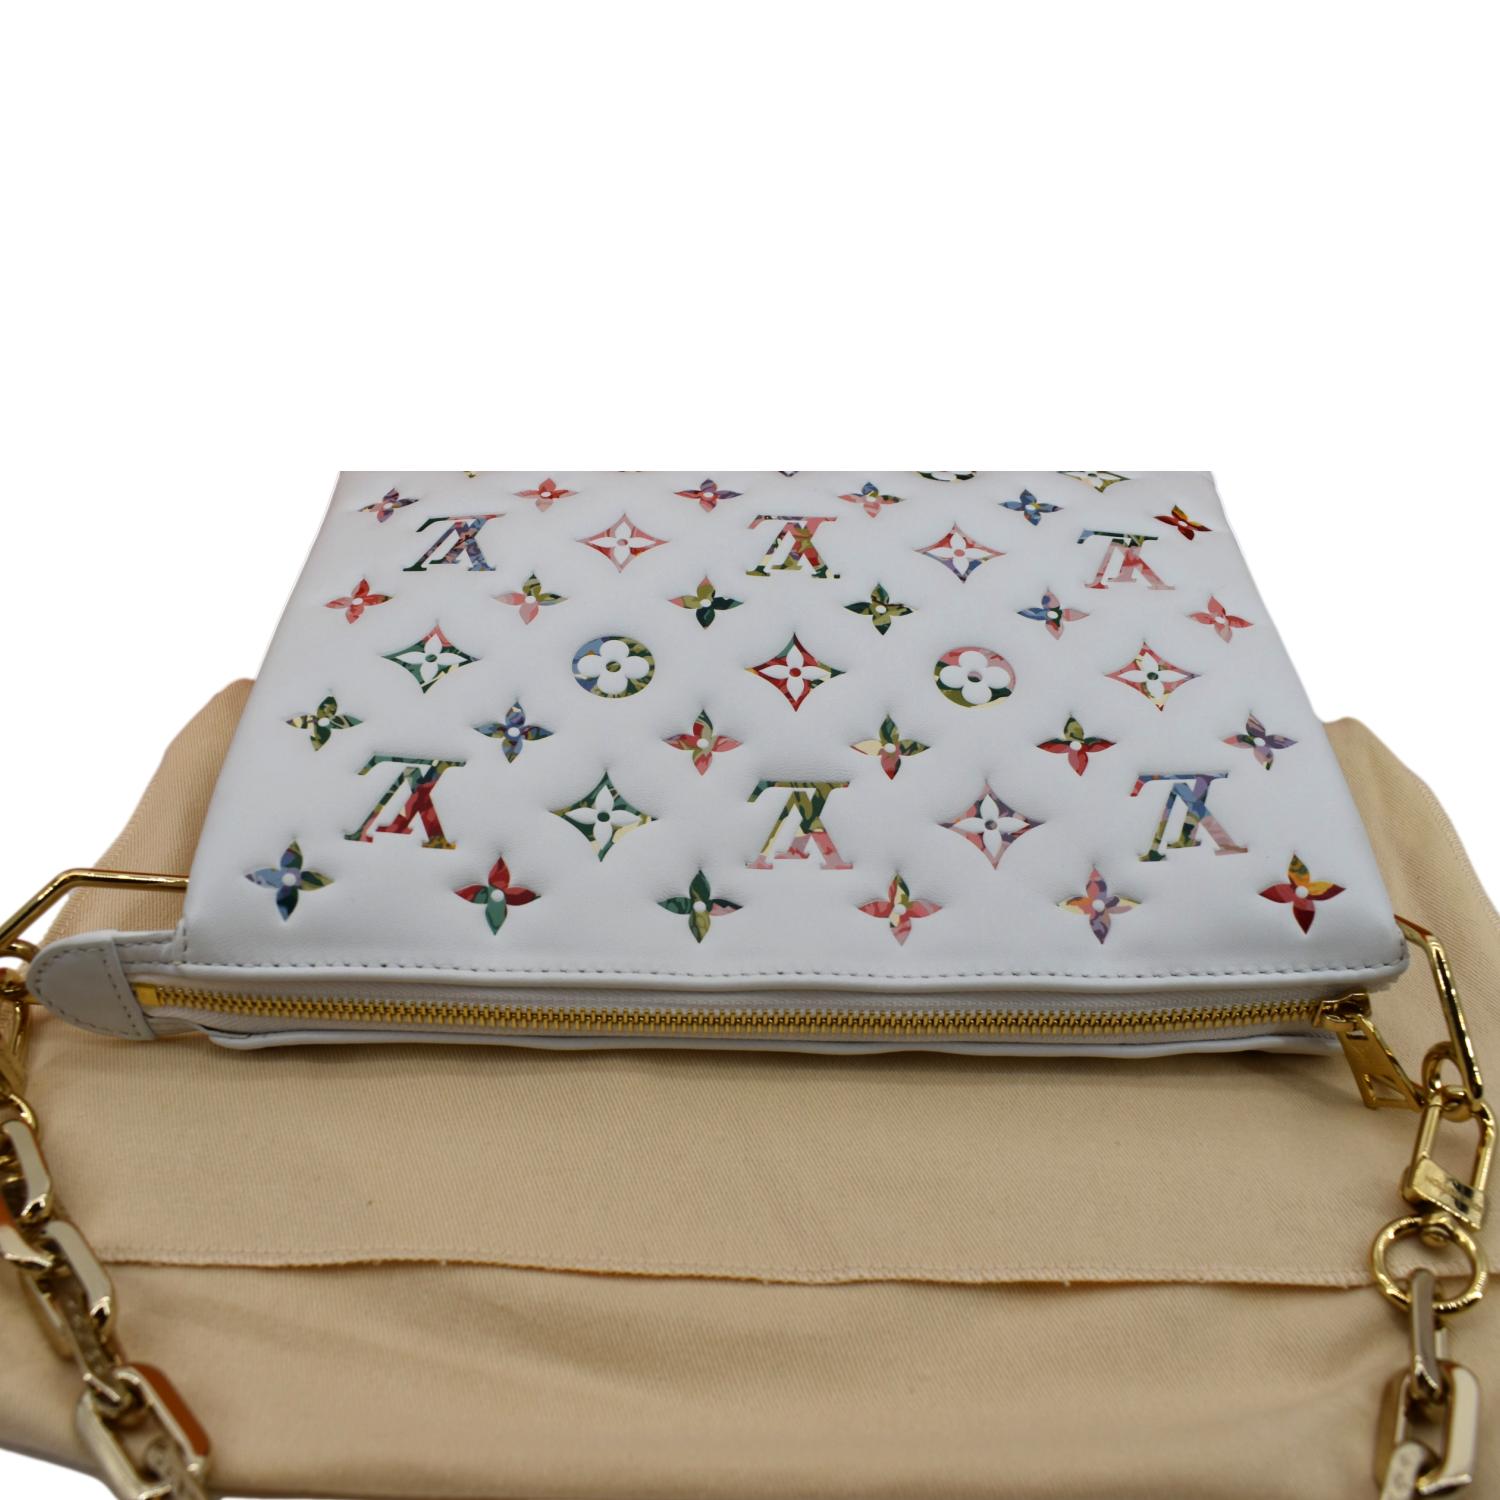 Louis Vuitton pre-owned Monogram Embossed Puffy Coussin PM two-way Handbag  - Farfetch